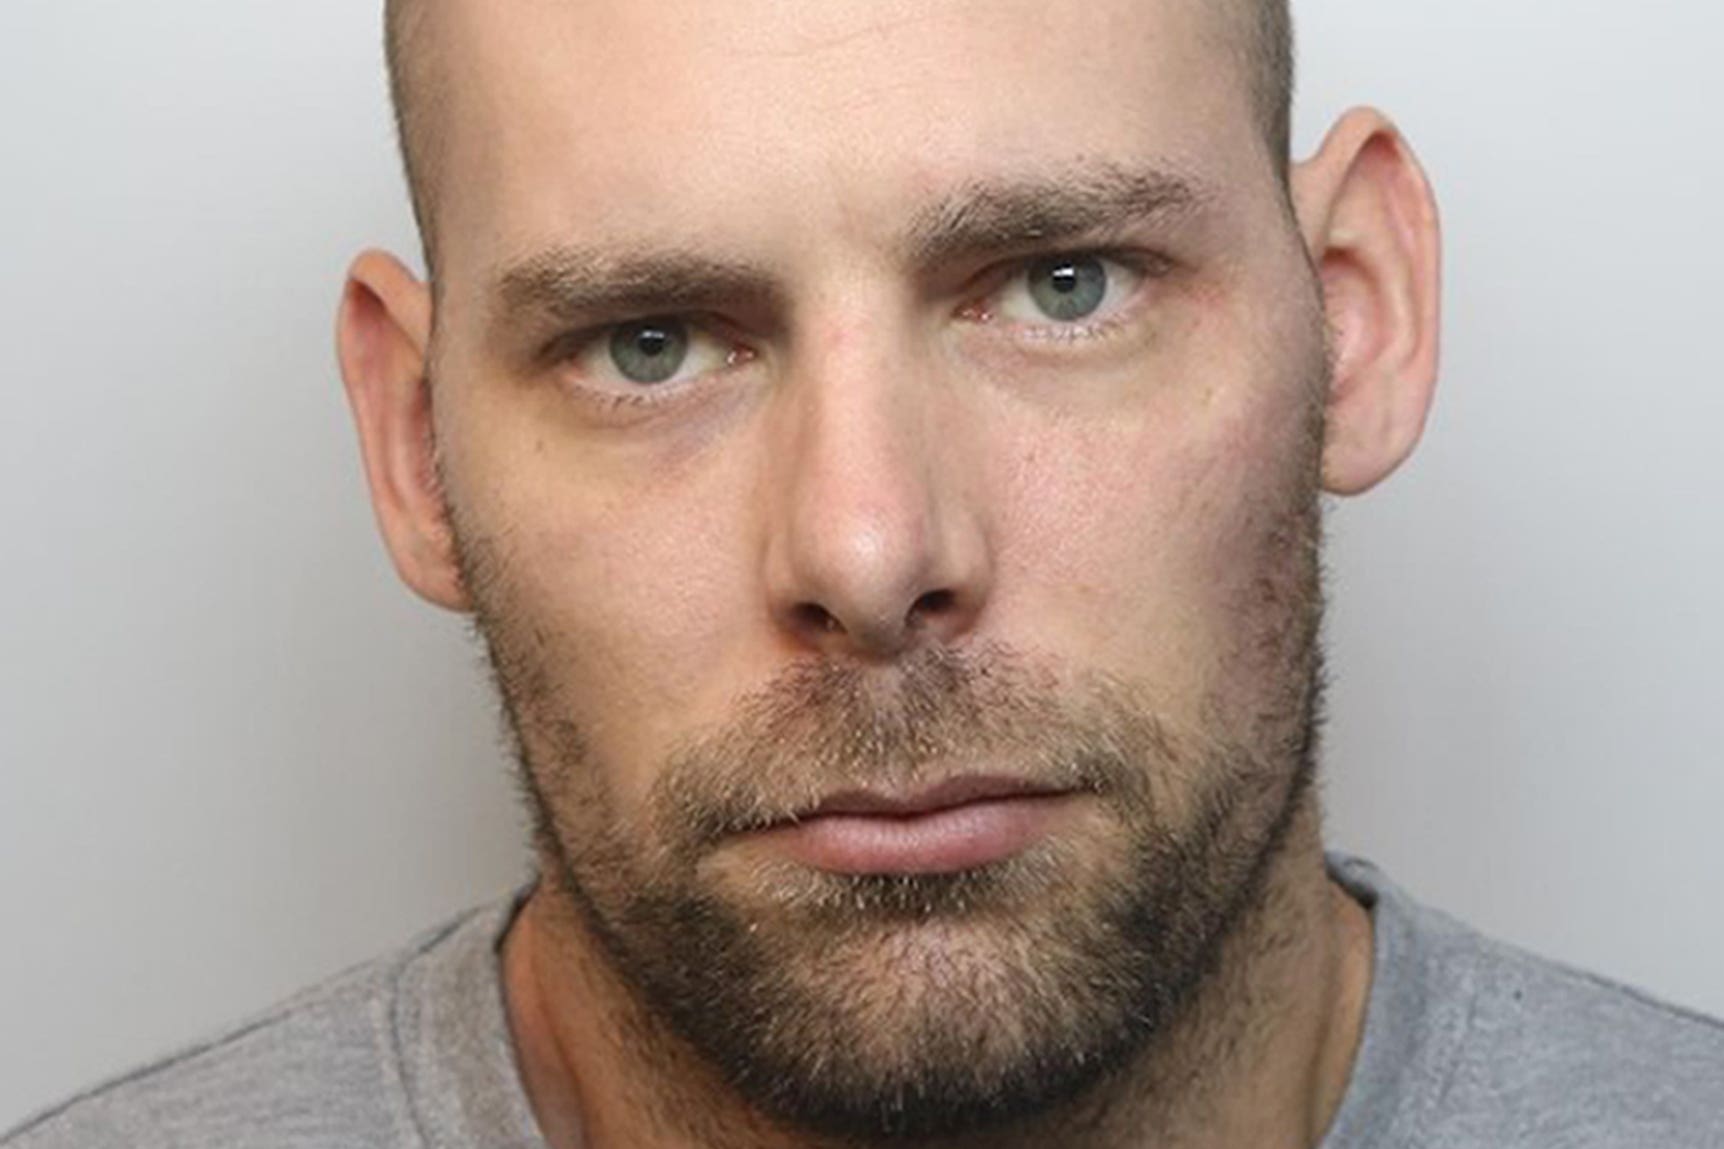 Damien Bendall was given a whole life order at Derby Crown Court for murdering his pregnant partner and three children